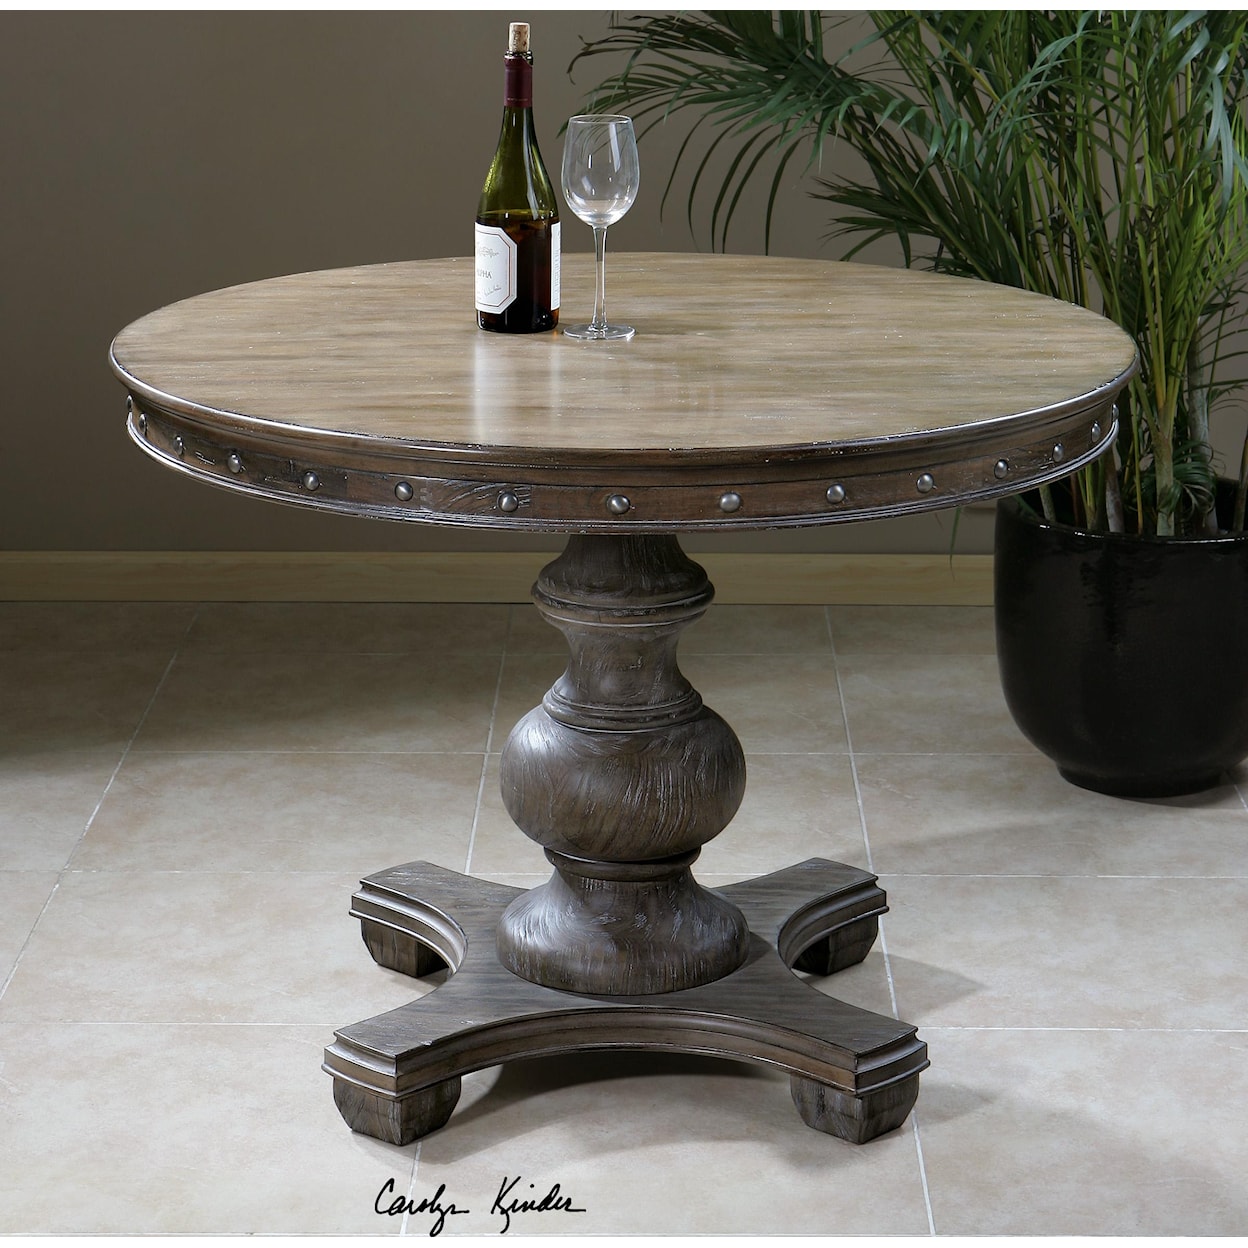 Uttermost Accent Furniture - Occasional Tables Sylvana Wood Round Table